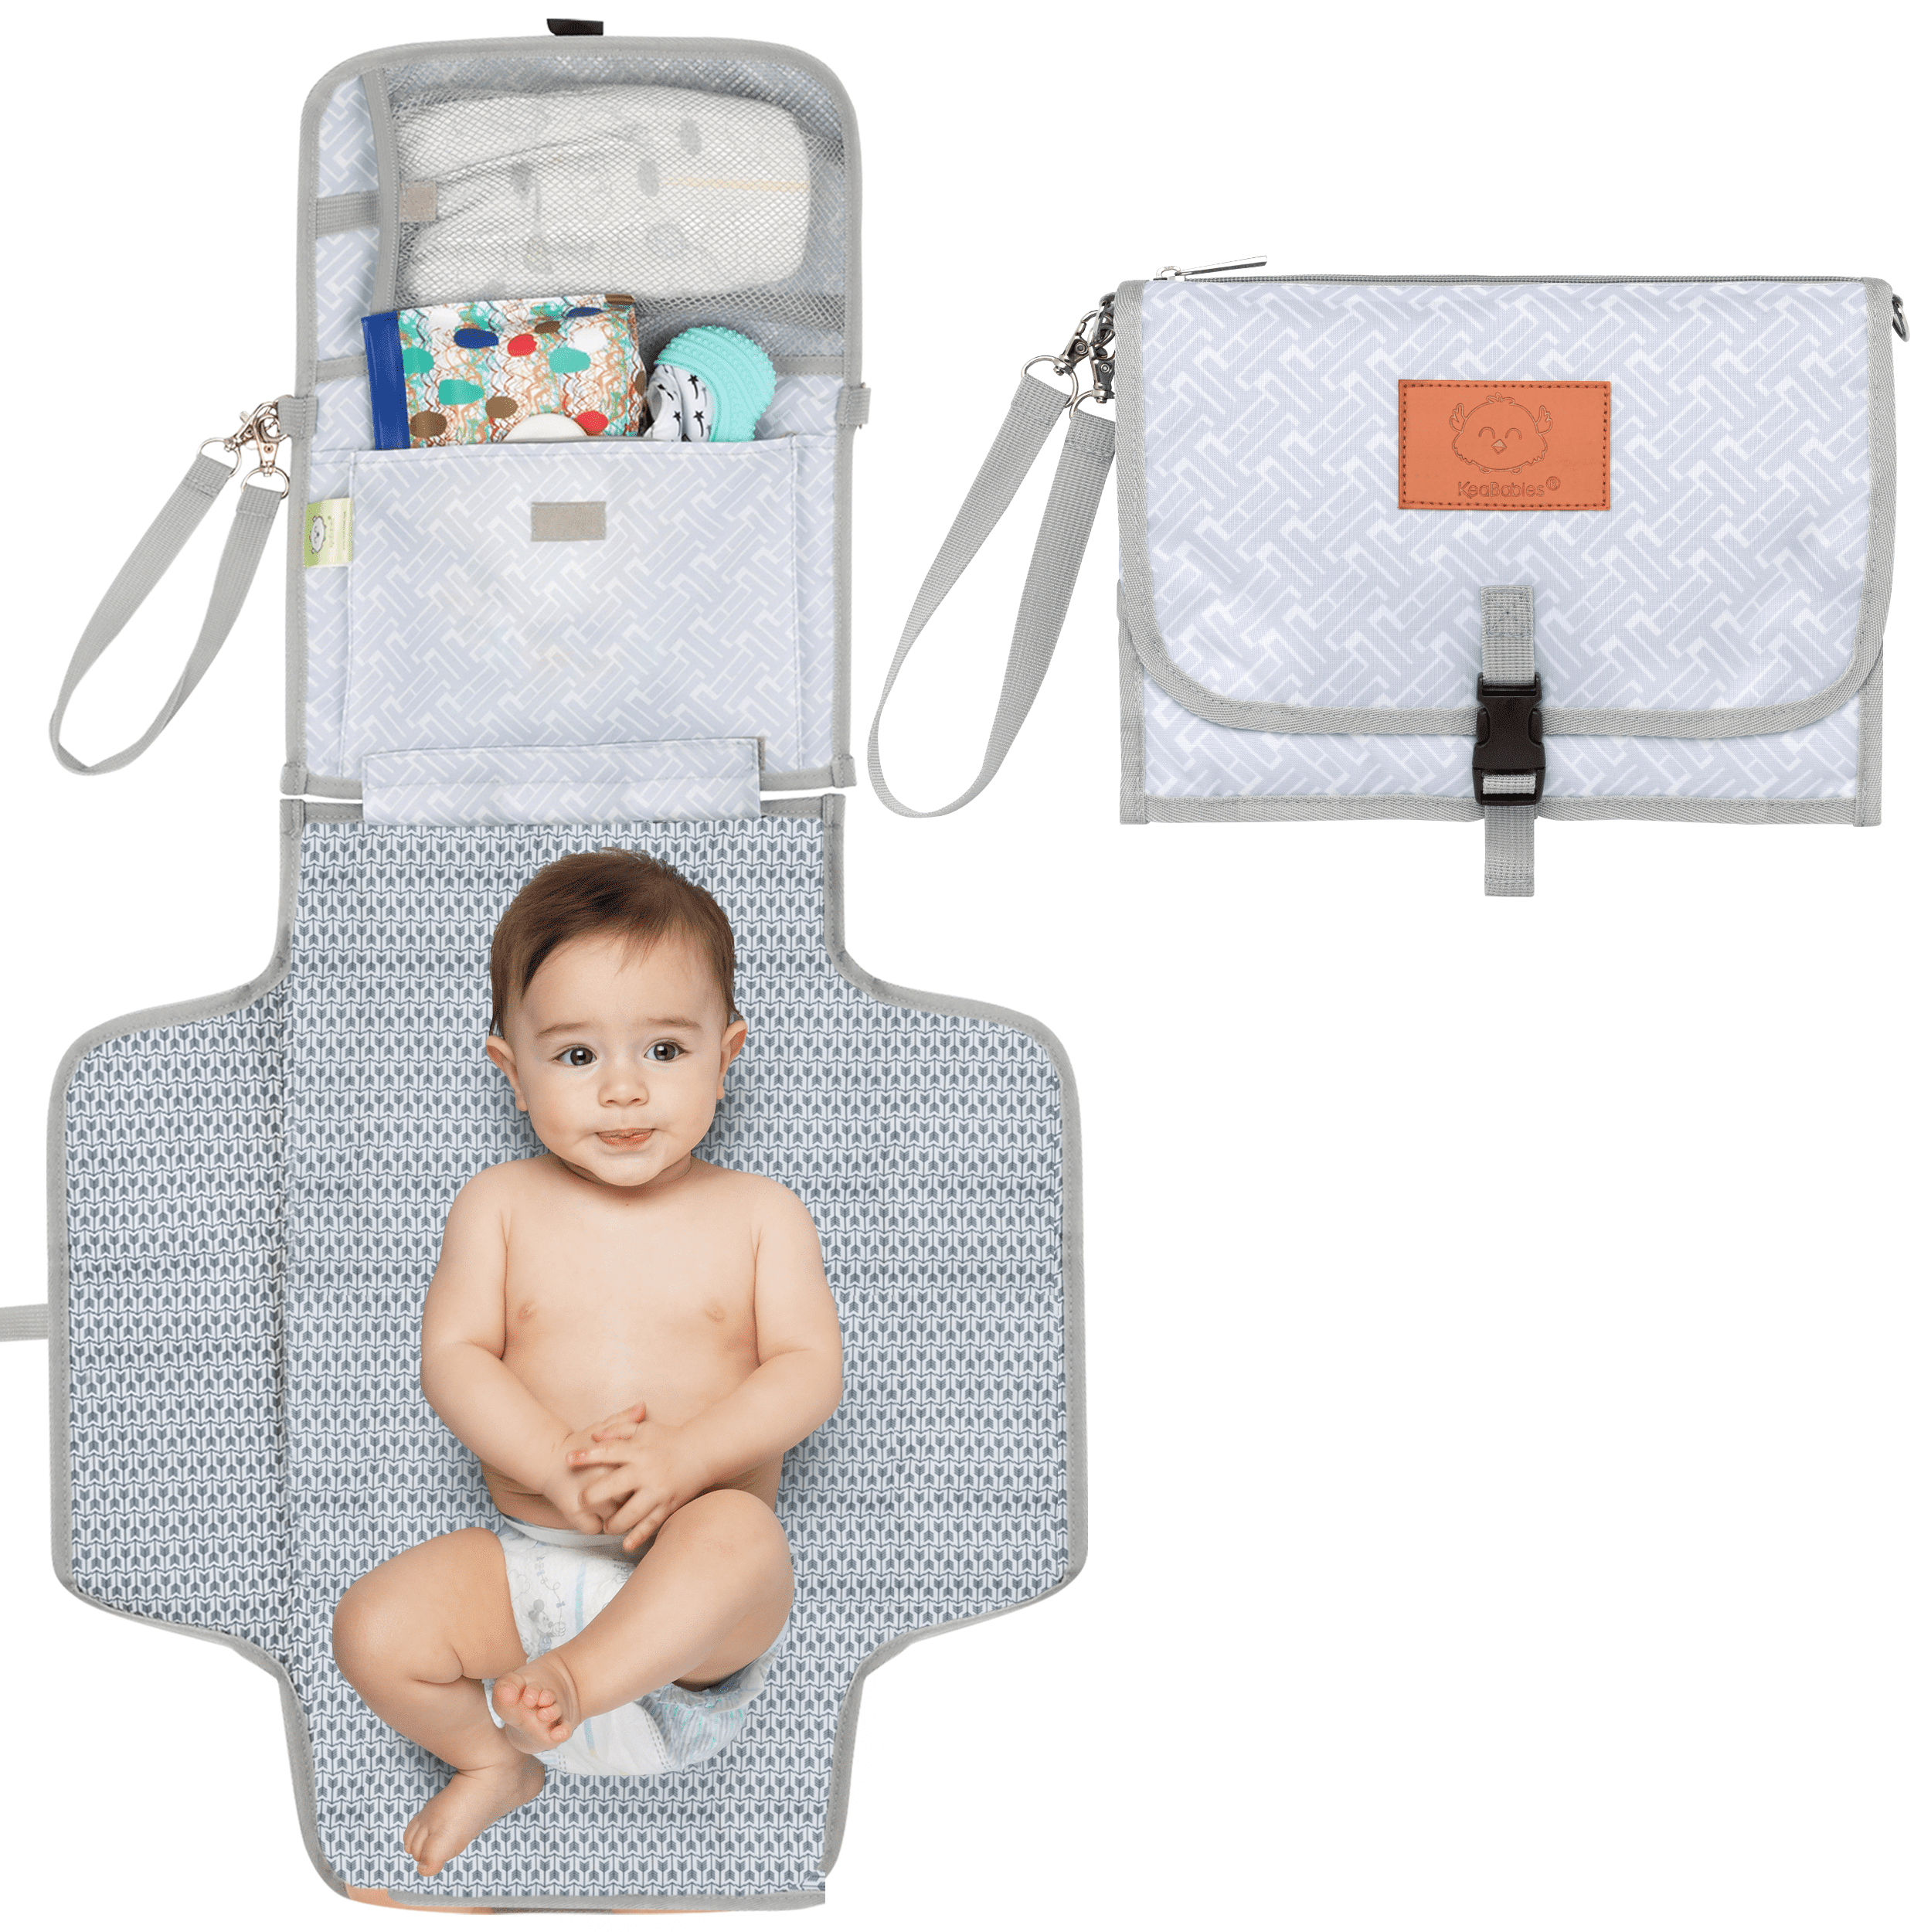 Expressions by Maya Portable Changing Station Diaper Clutch with Detachable Pad 